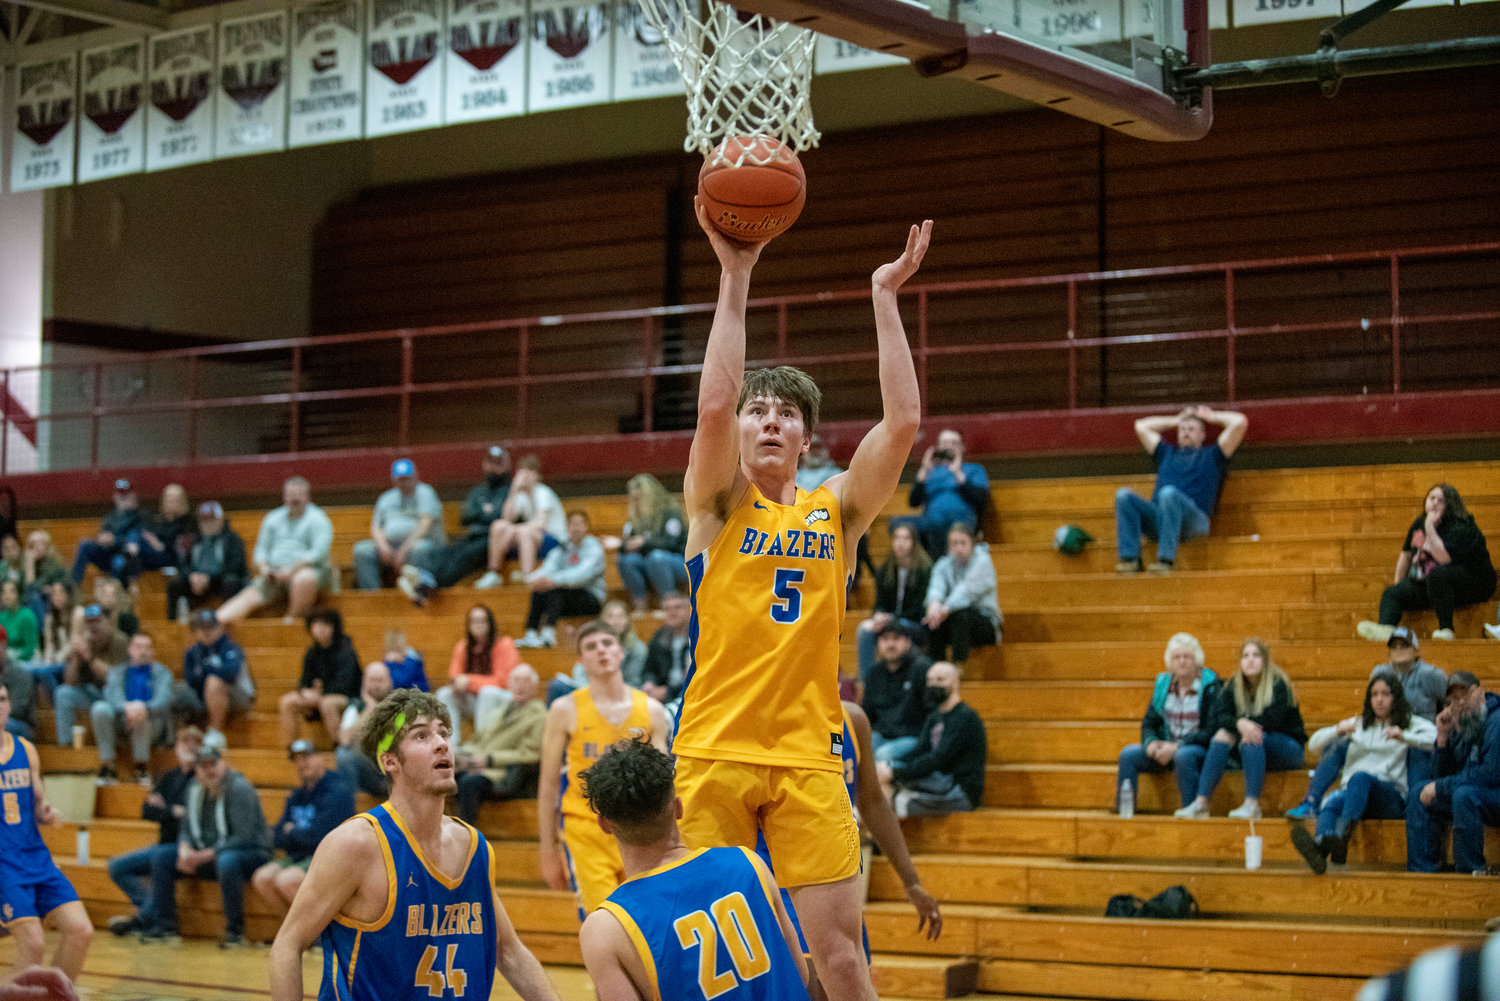 Toledo's Carson Olmstead (5) shoots a jumper during the SWW Senior All-Star Game on March 26.